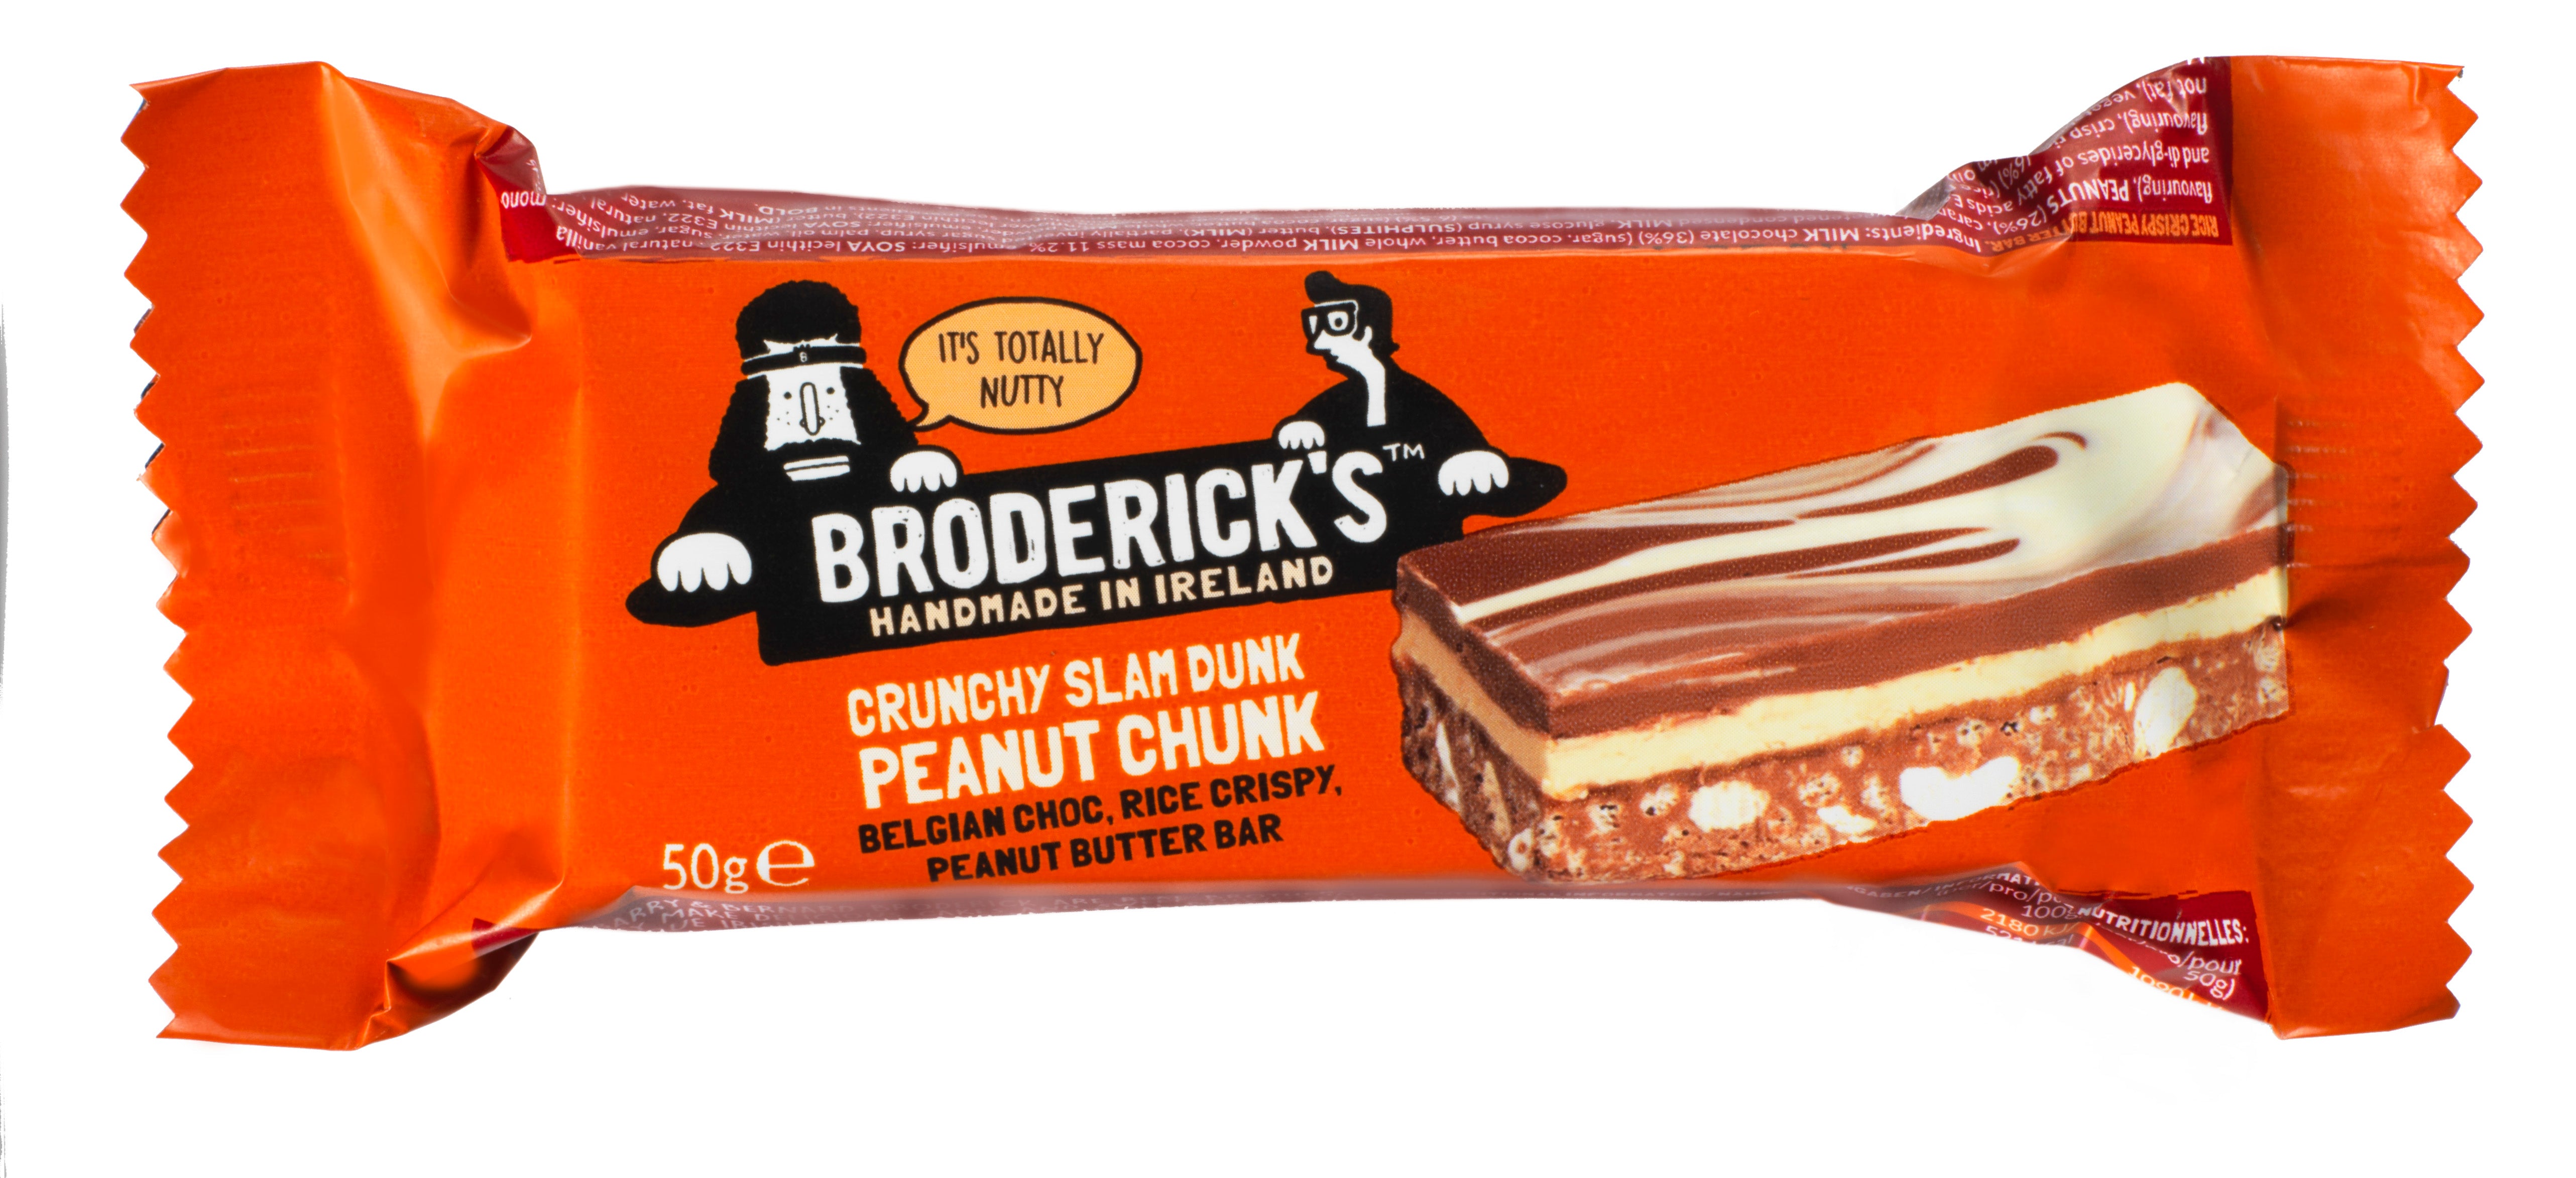 Broderick's - Crunchy Slam Dunk Peanut Chunk Bar // Stores Supply // Stores Supply